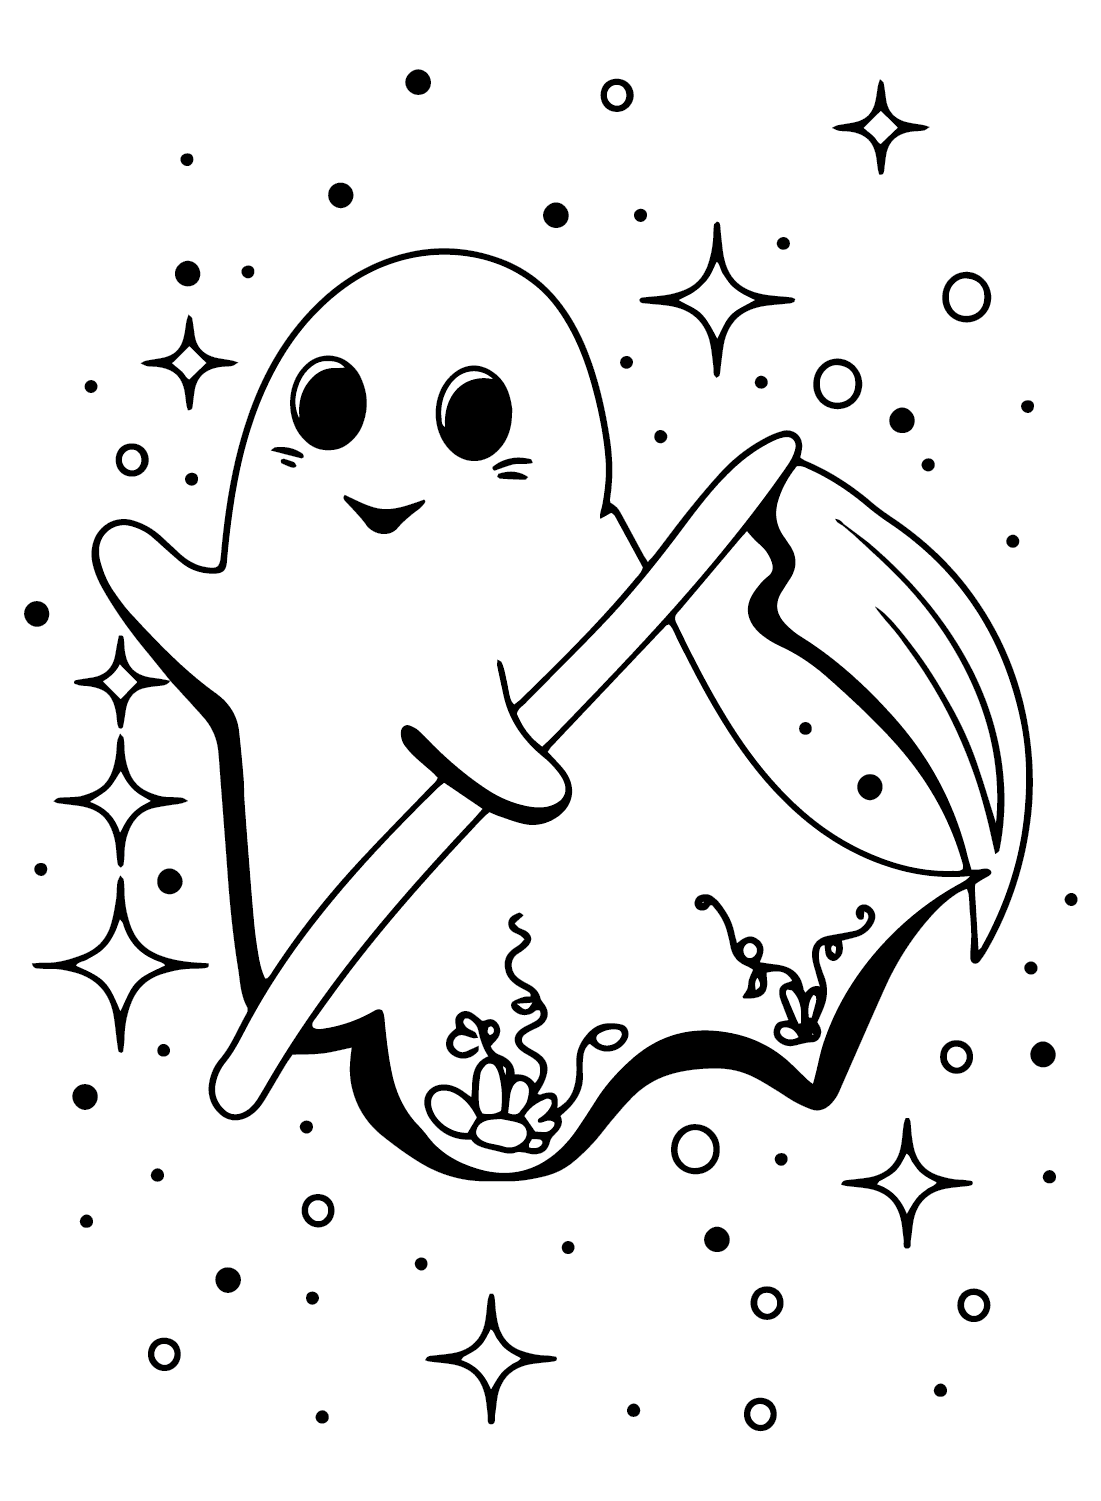 Printable Ghost Coloring Page from Ghost